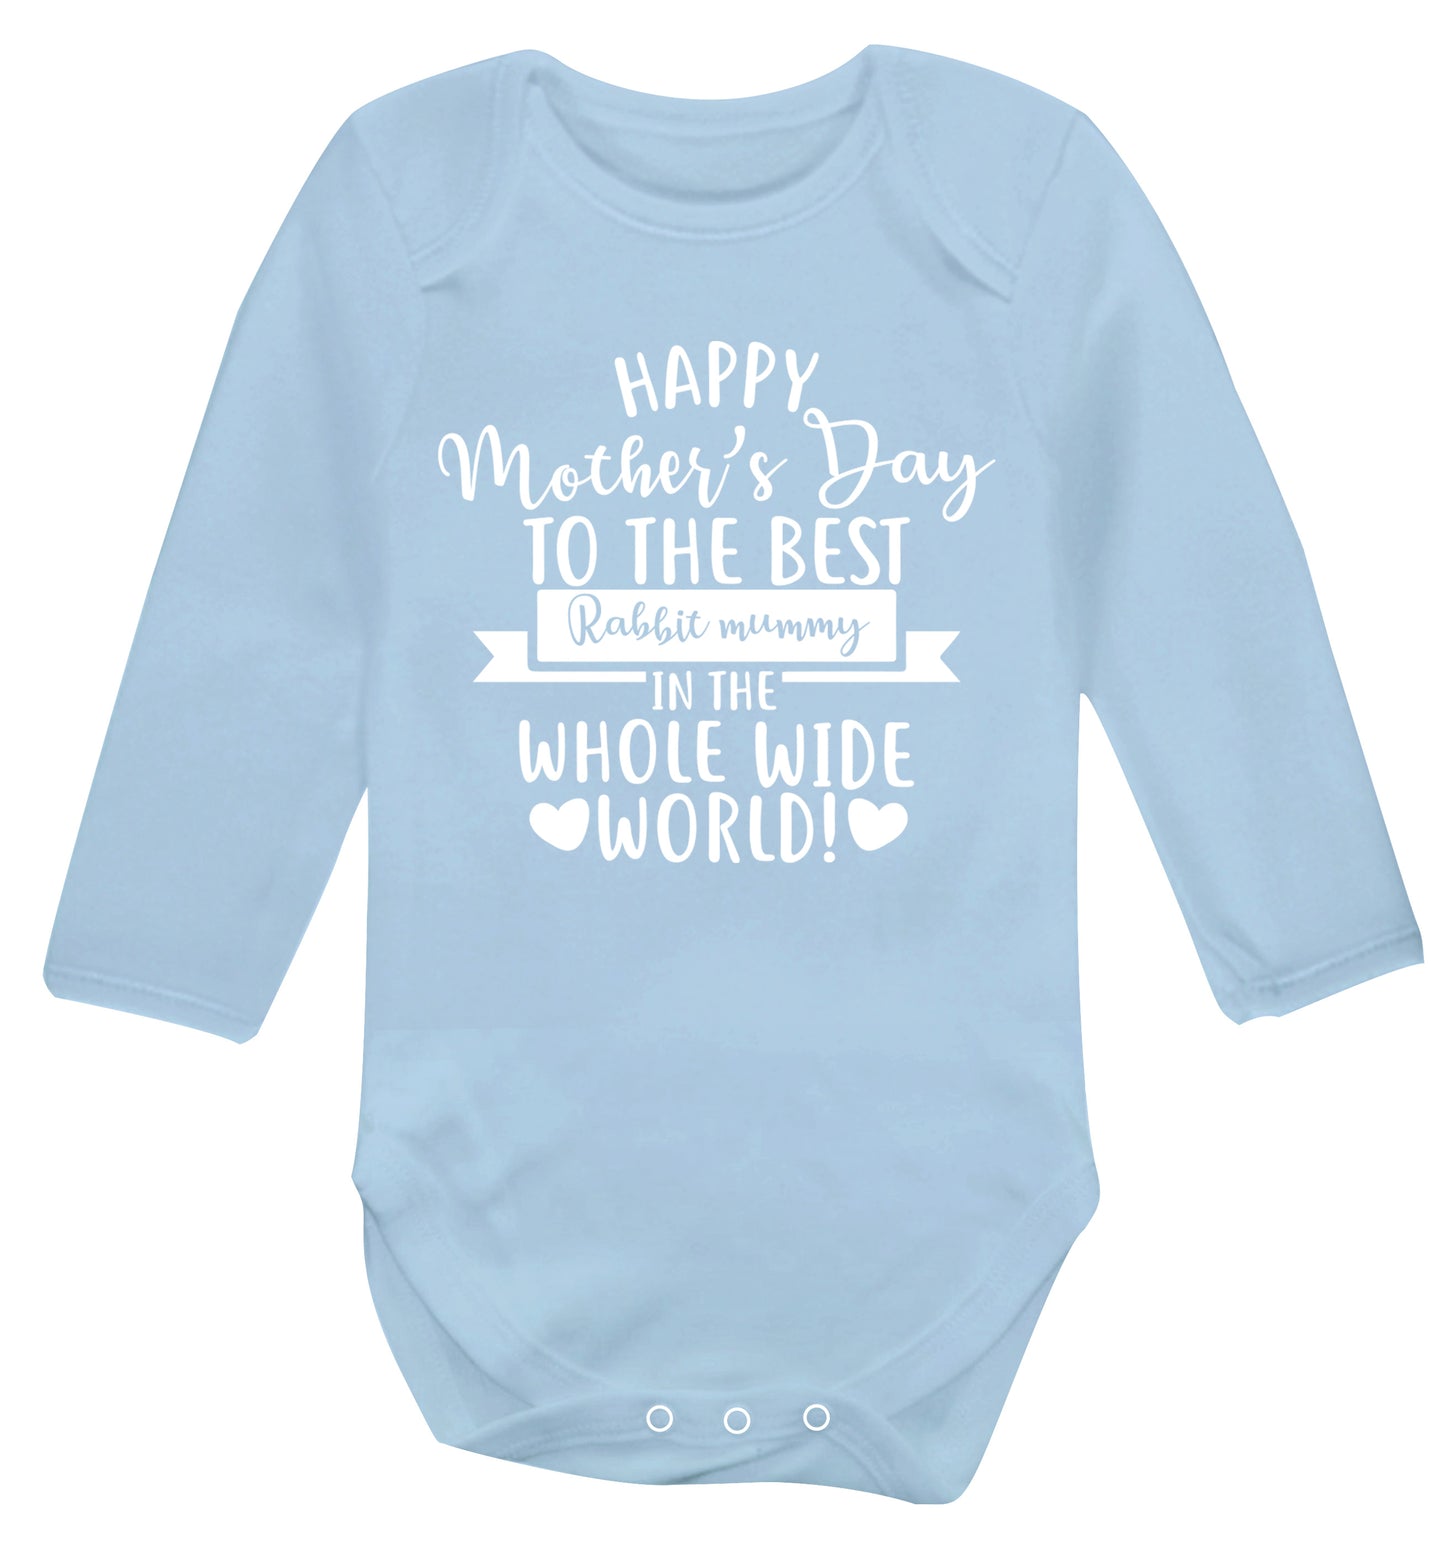 Happy mother's day to the best rabbit mummy in the world Baby Vest long sleeved pale blue 6-12 months